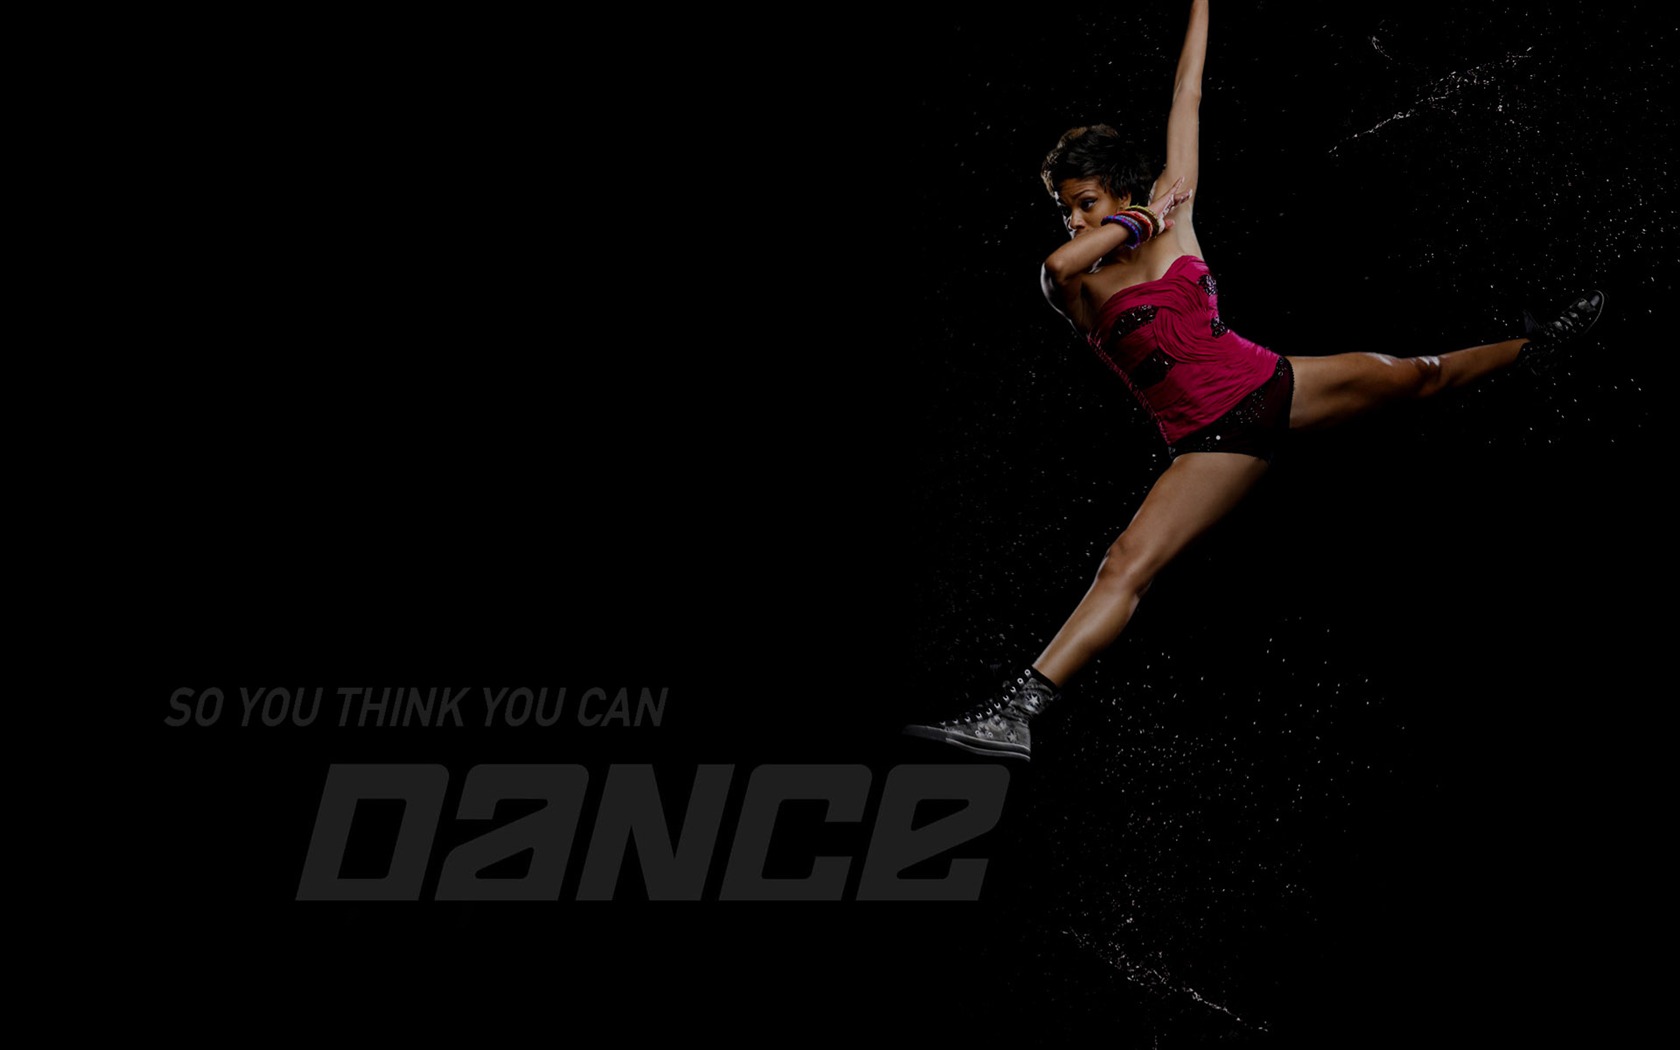 So You Think You Can Dance 舞林爭霸壁紙(二) #15 - 1680x1050